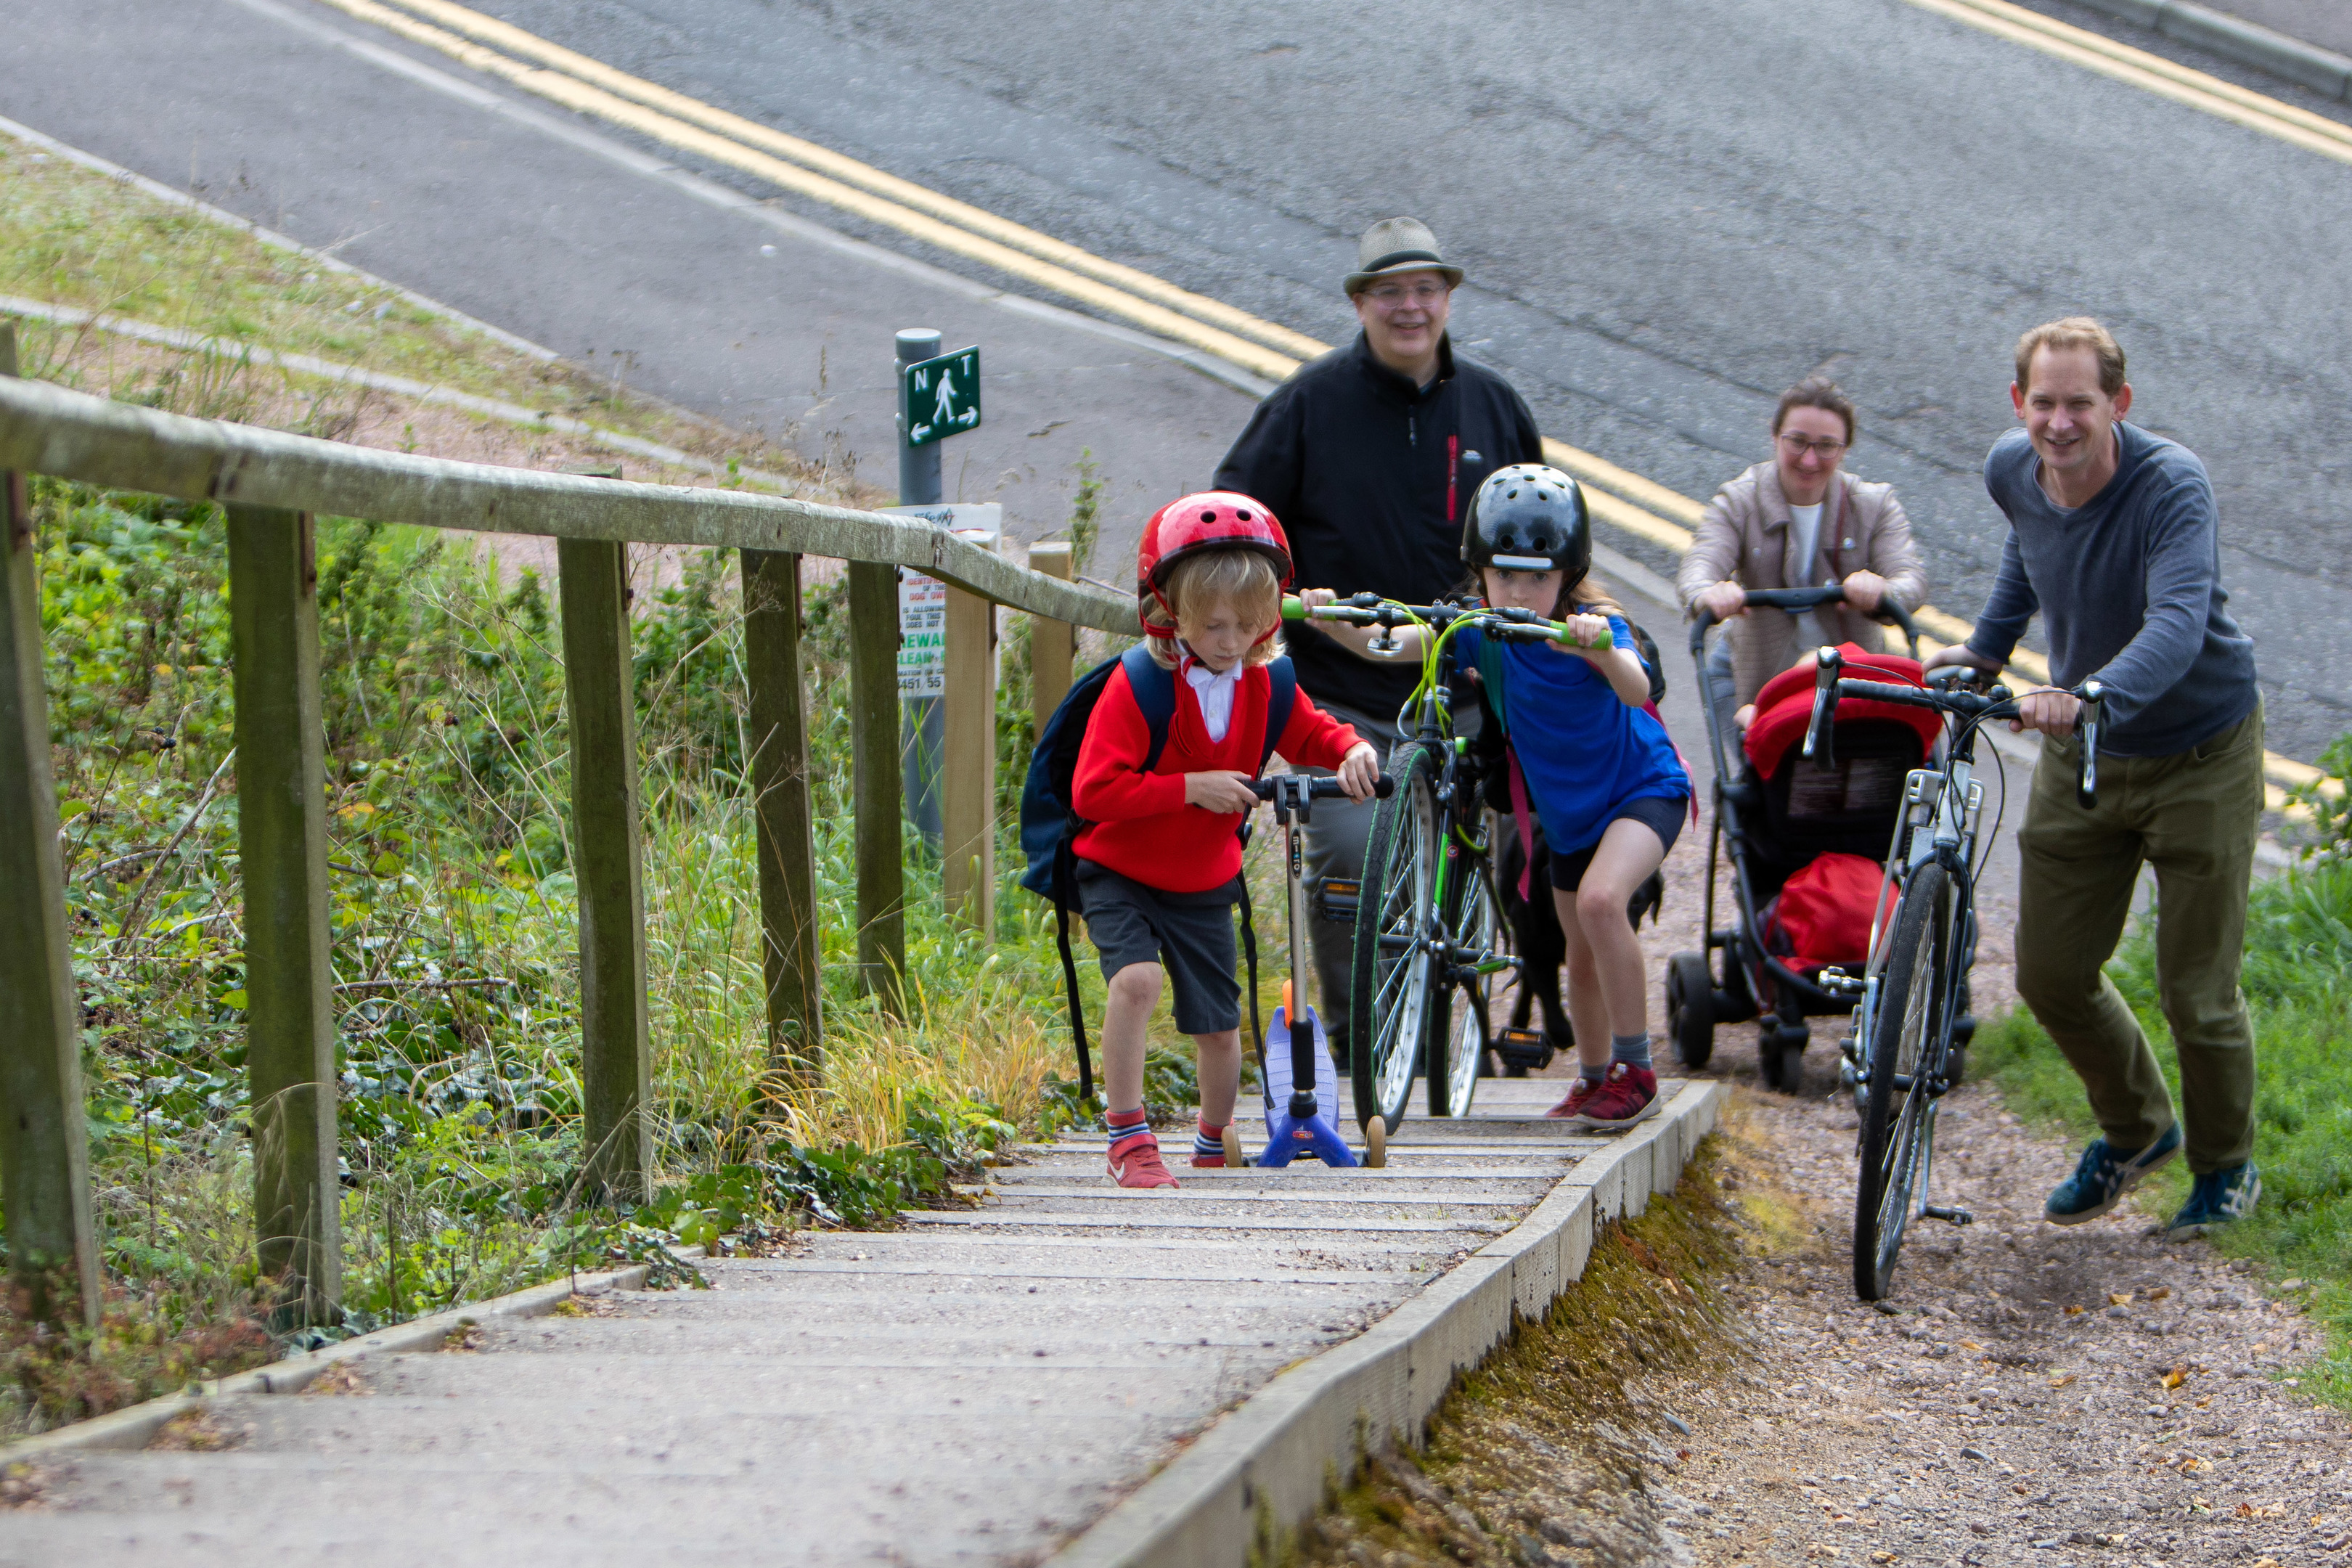 Laurie Finney (6), Freya Finney (9) and Alan Marshall (39) followed by Cllr Jonny Tepp and Nissa Finney (40) attempting a sectrion of the cycle path subject to a feasability study now funding has been approved.